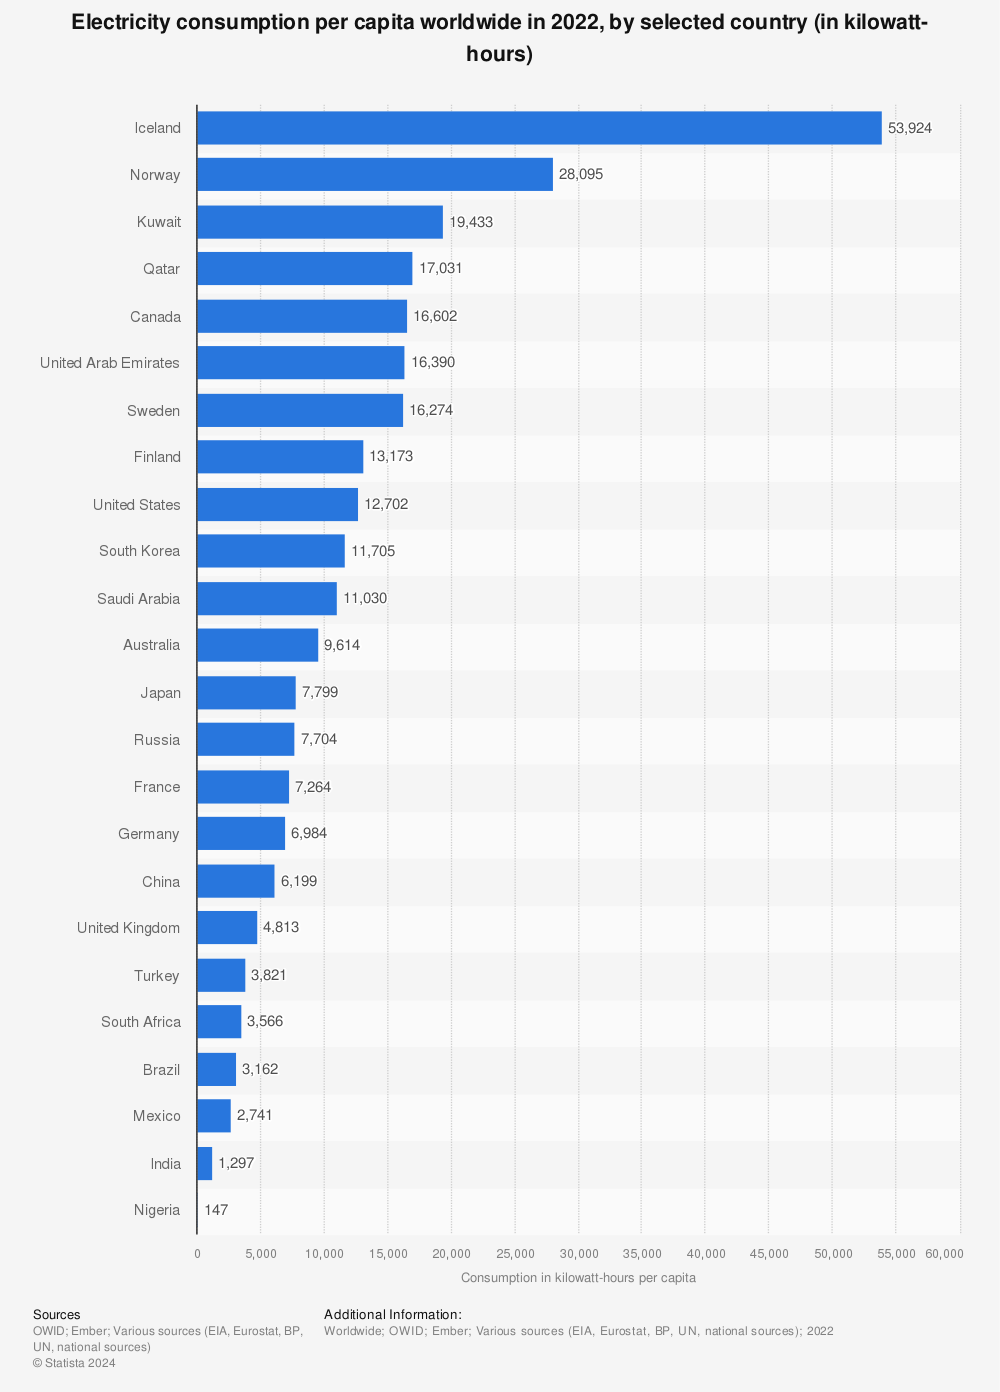 Statistic: Electricity consumption per capita worldwide in 2022, by selected country (in kilowatt-hours) | Statista